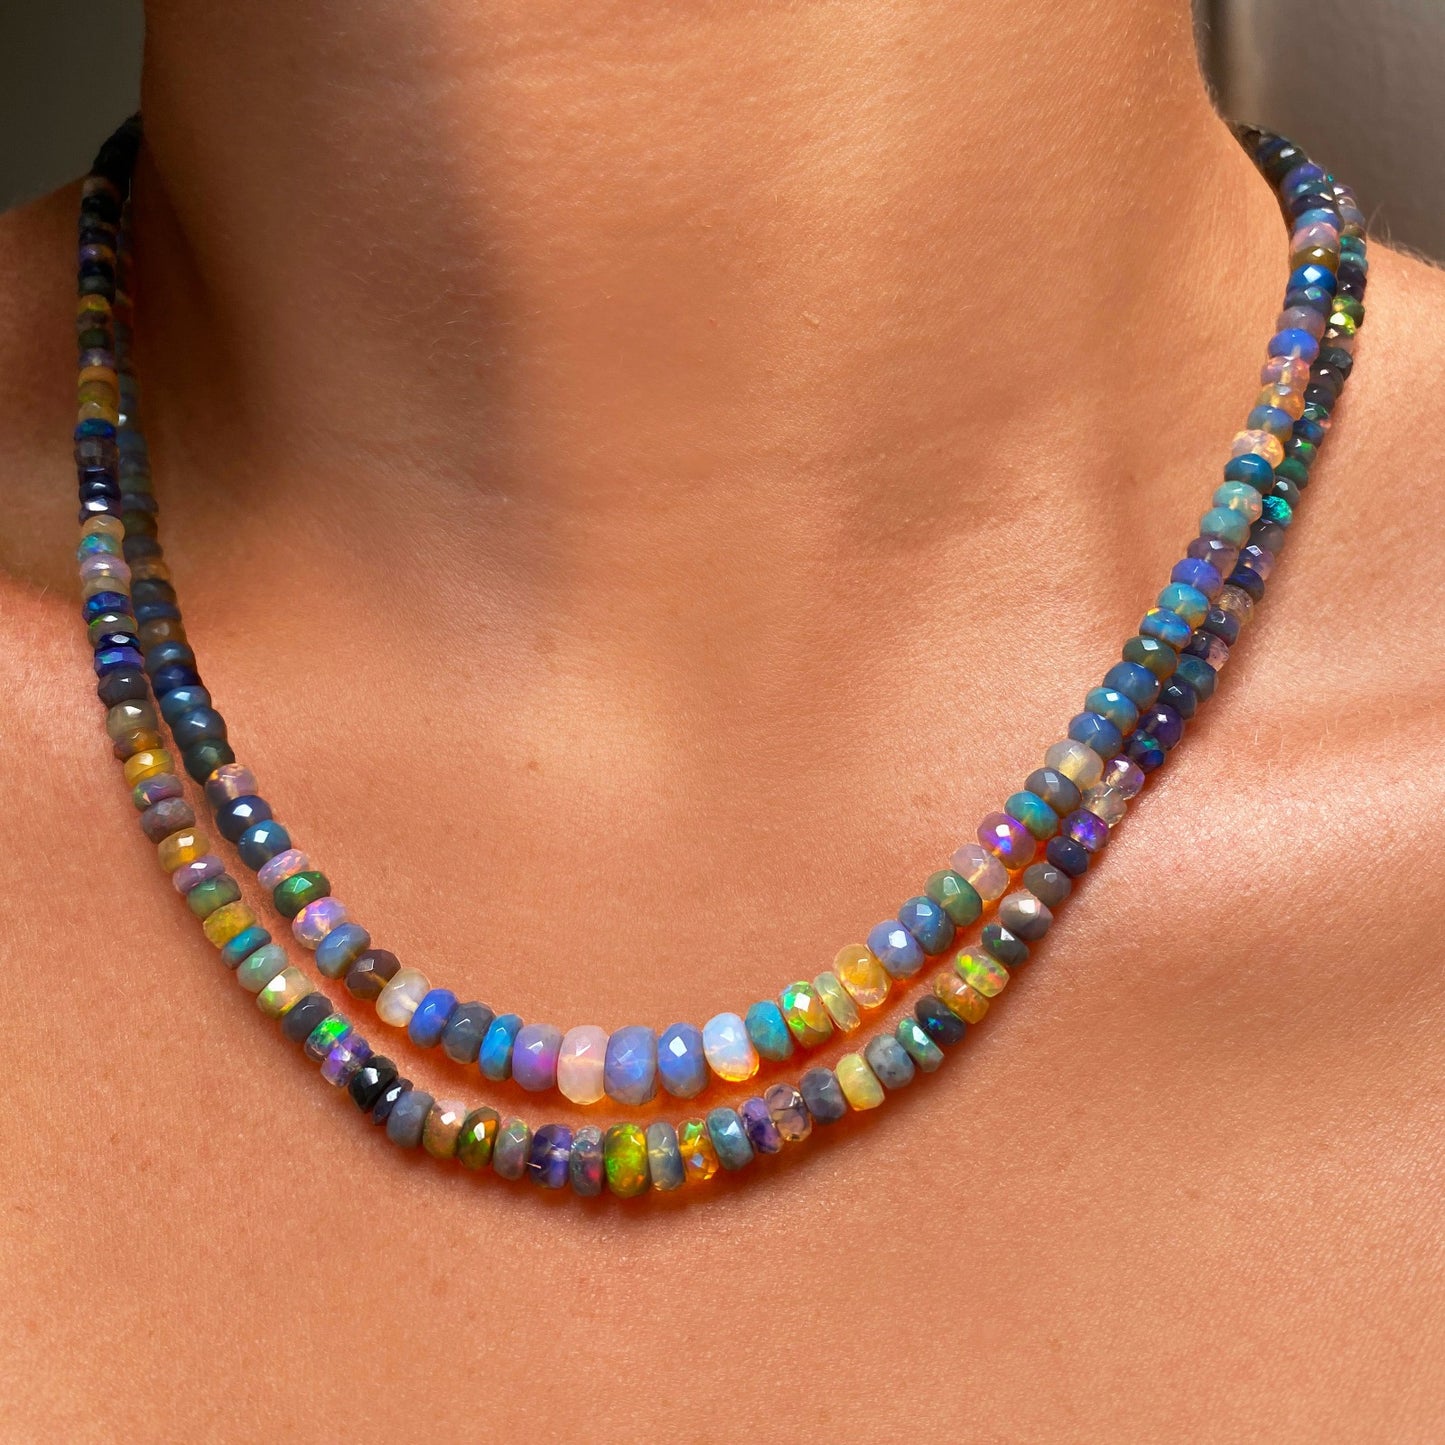 Shimmering beaded necklace made of faceted opals in shades of green, yellow, and blue on a gold linking ovals clasp.